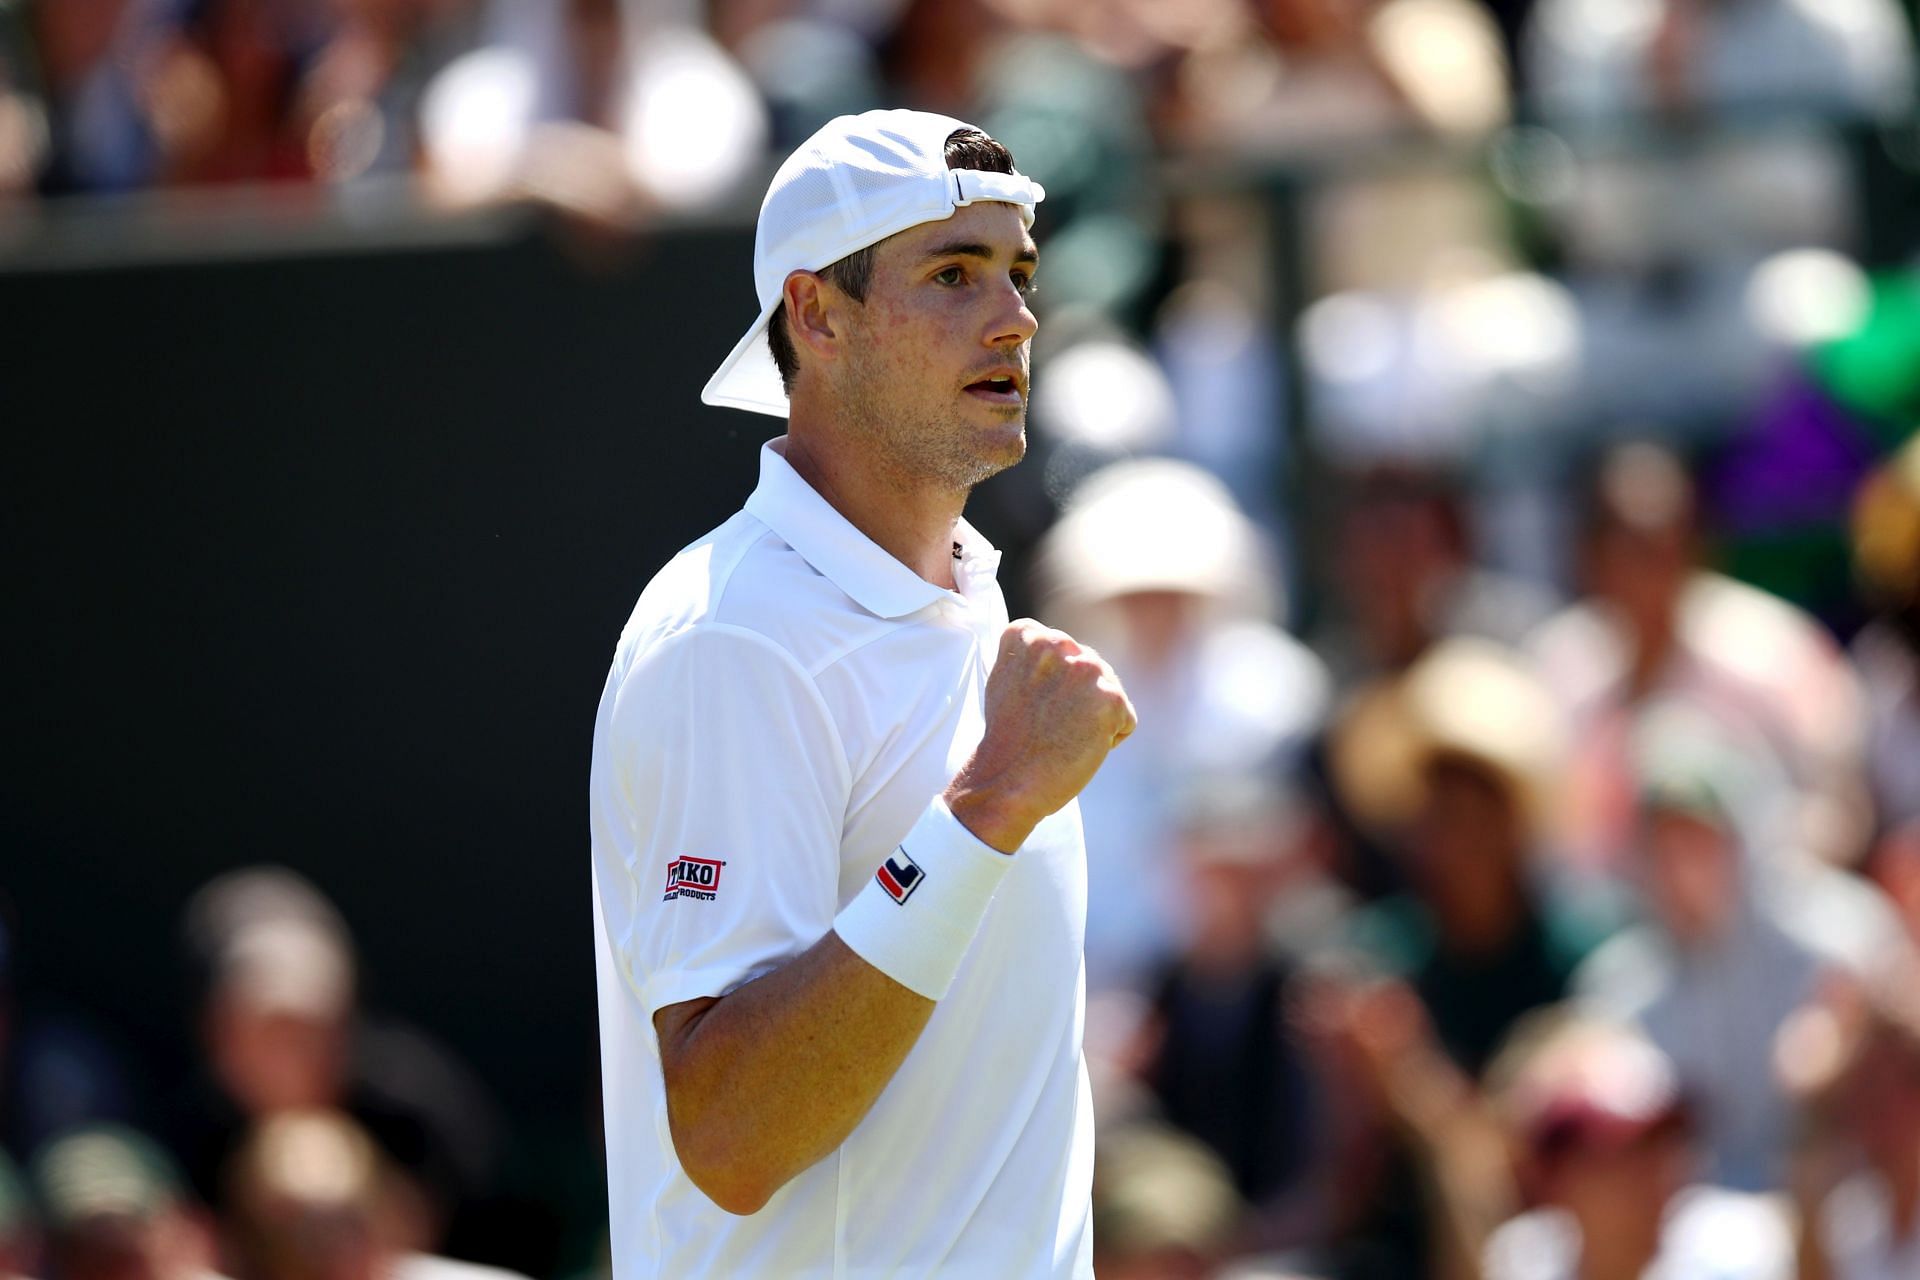 John Isner holds the record for the second longest tie-break at Wimbledon